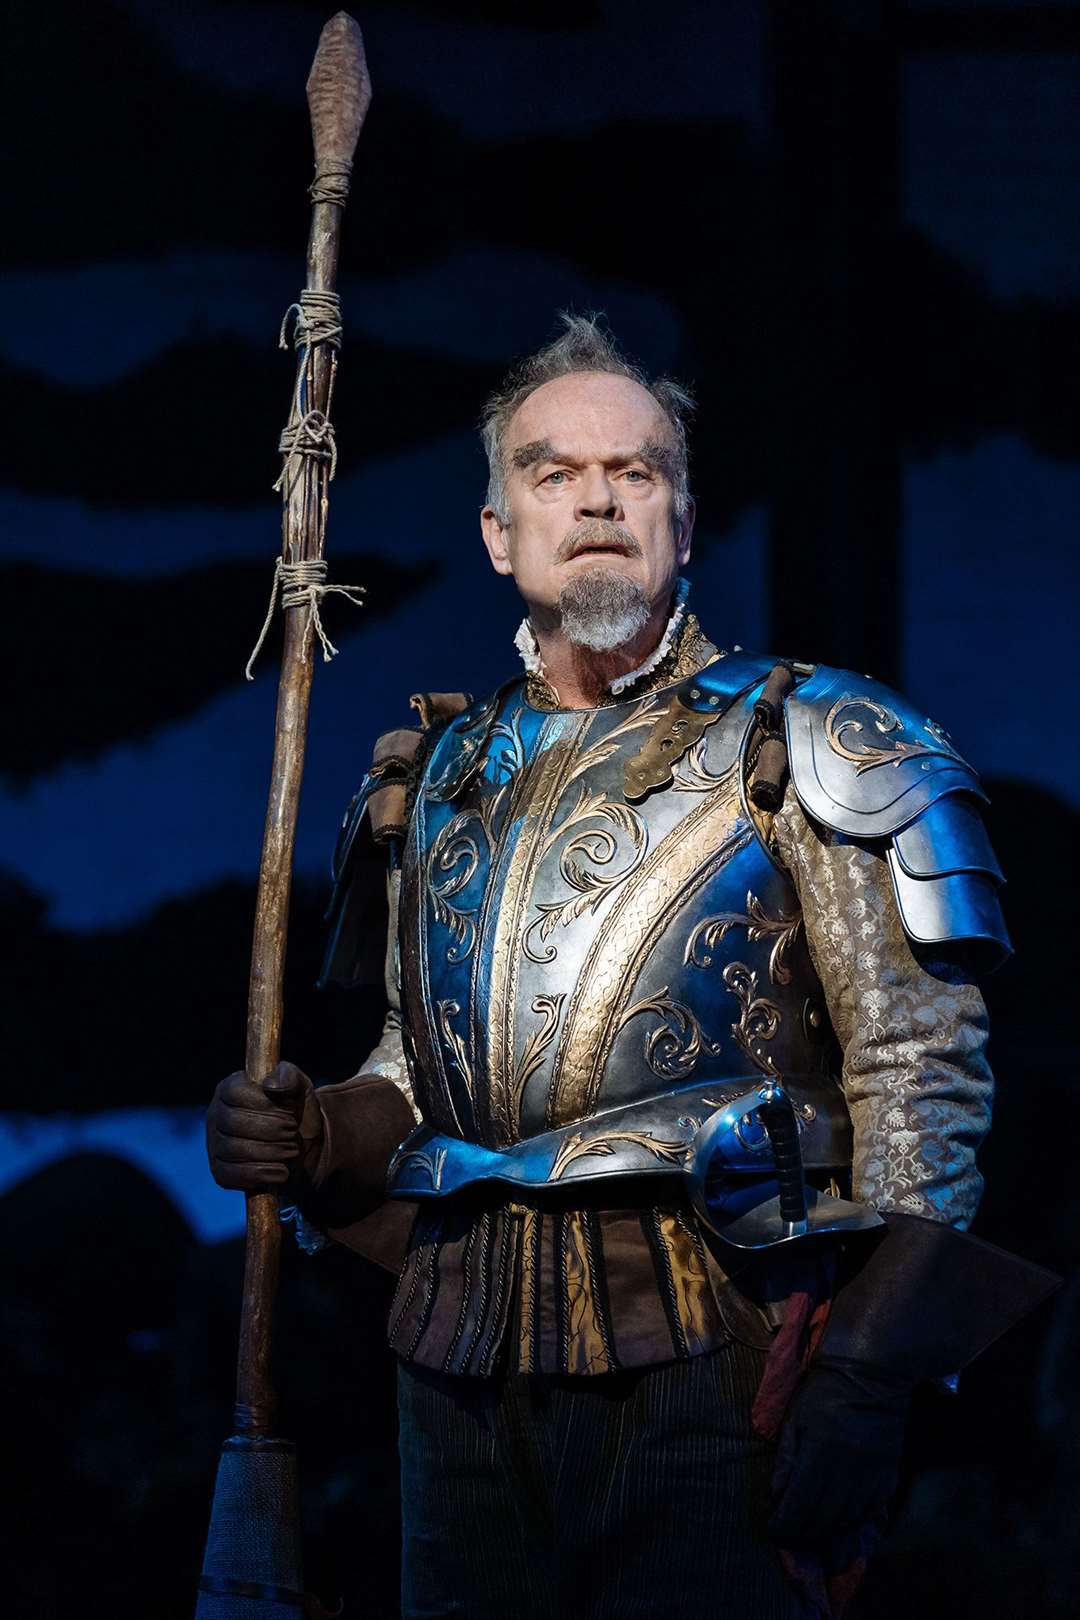 Kelsey Grammer as Don Quixote